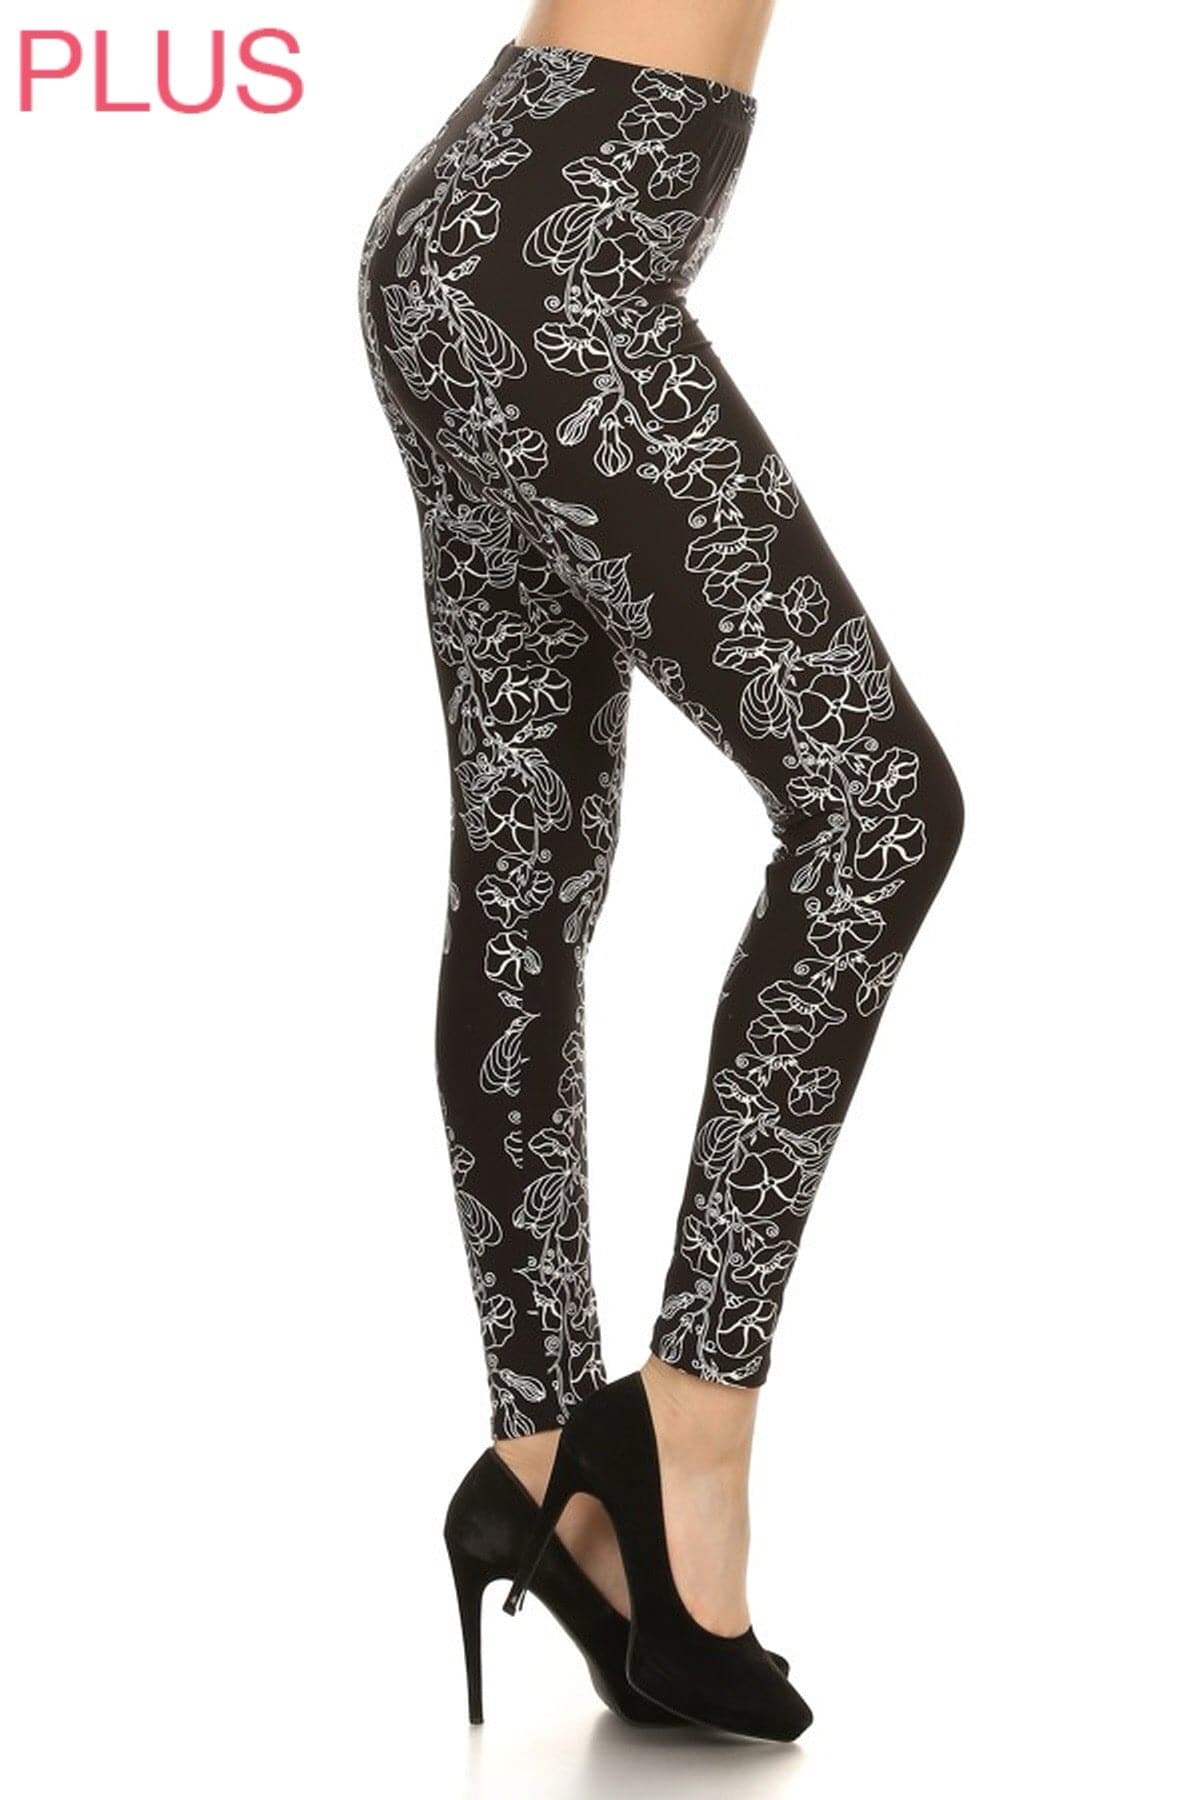 All About Me Leggings